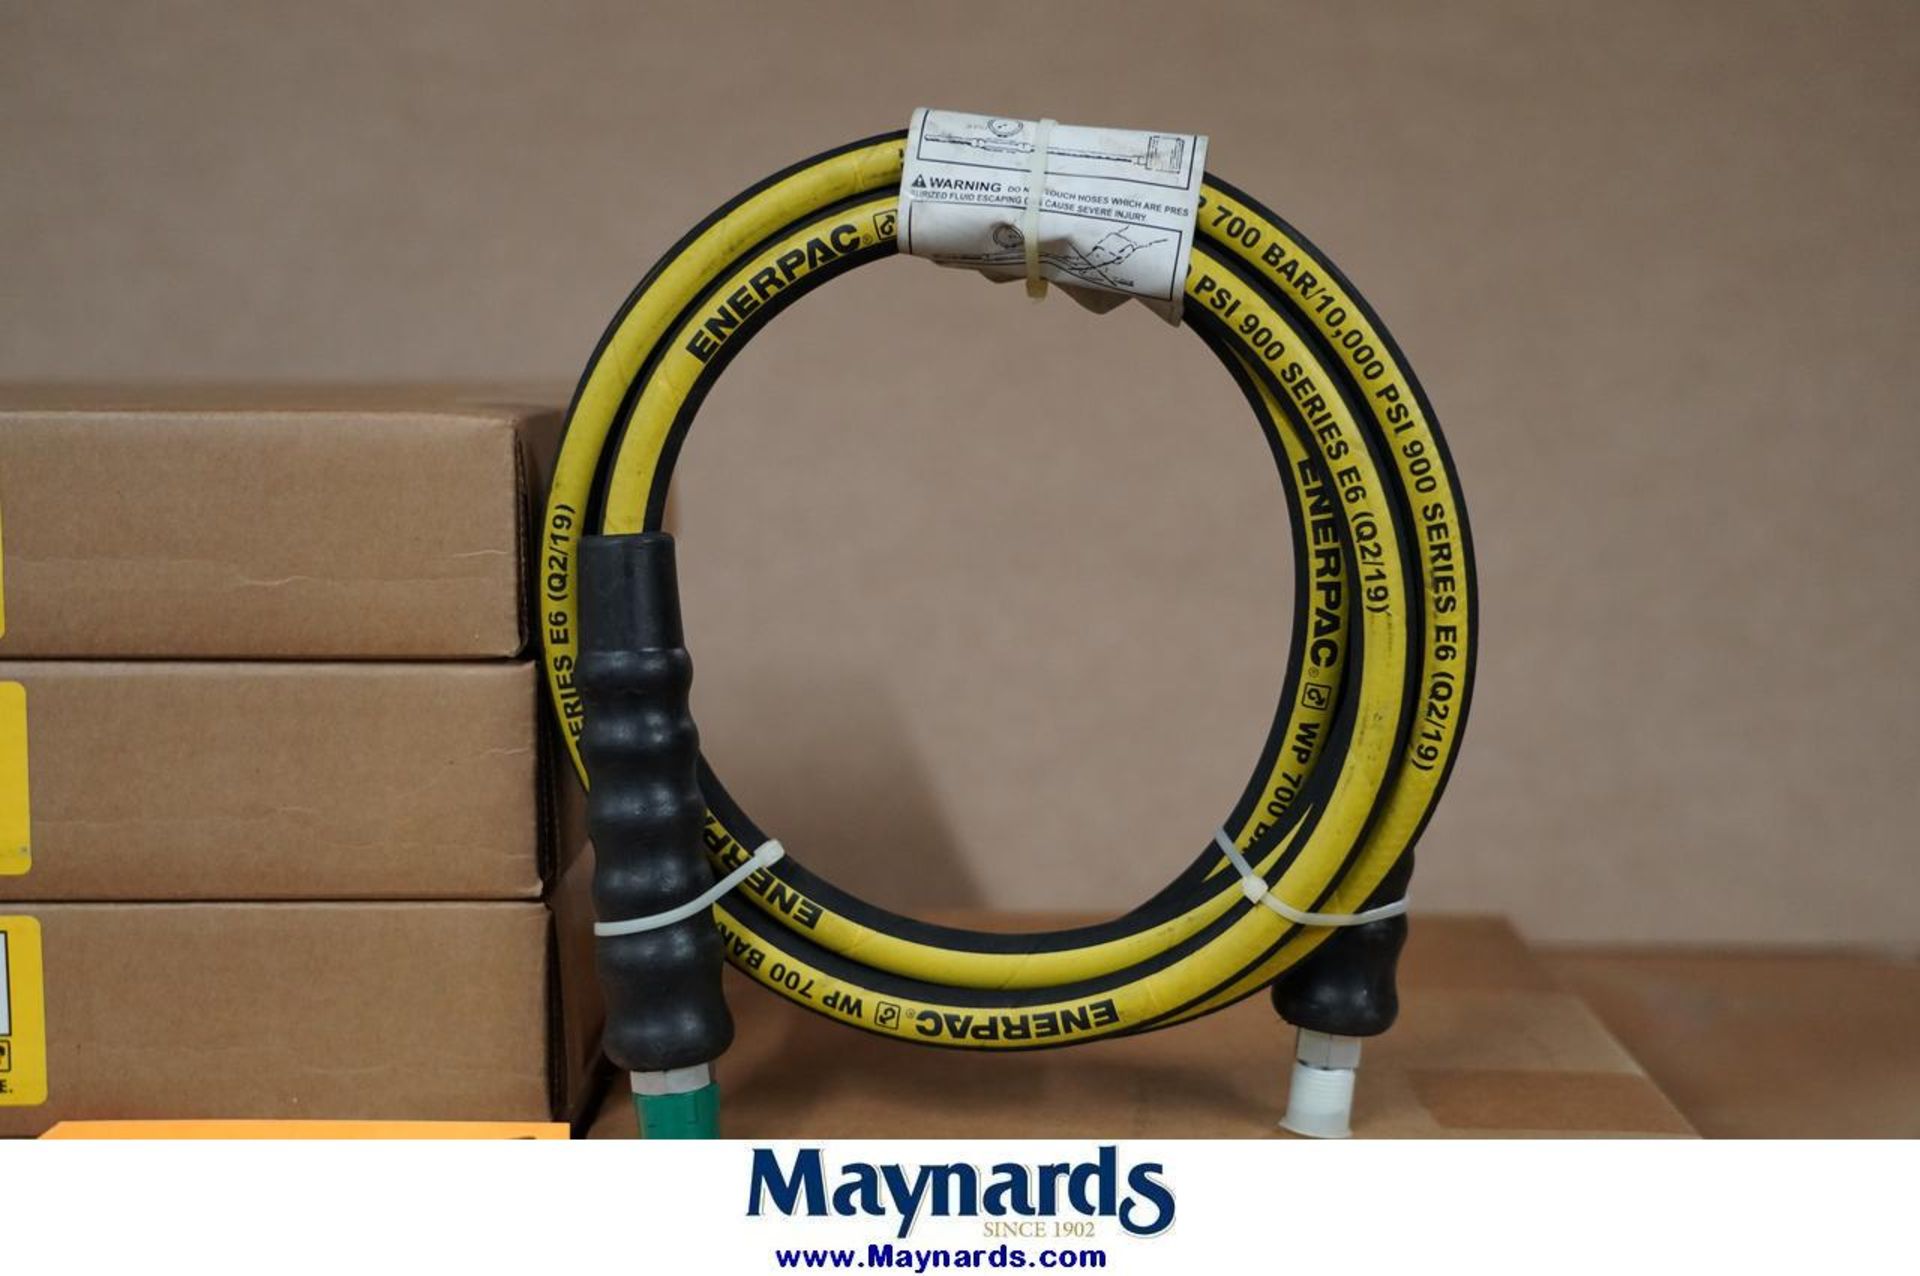 Enerpac H9210S (5) 10 Ft Heavy Duty Rubber High Pressure Hydraulic Hose - Image 3 of 3